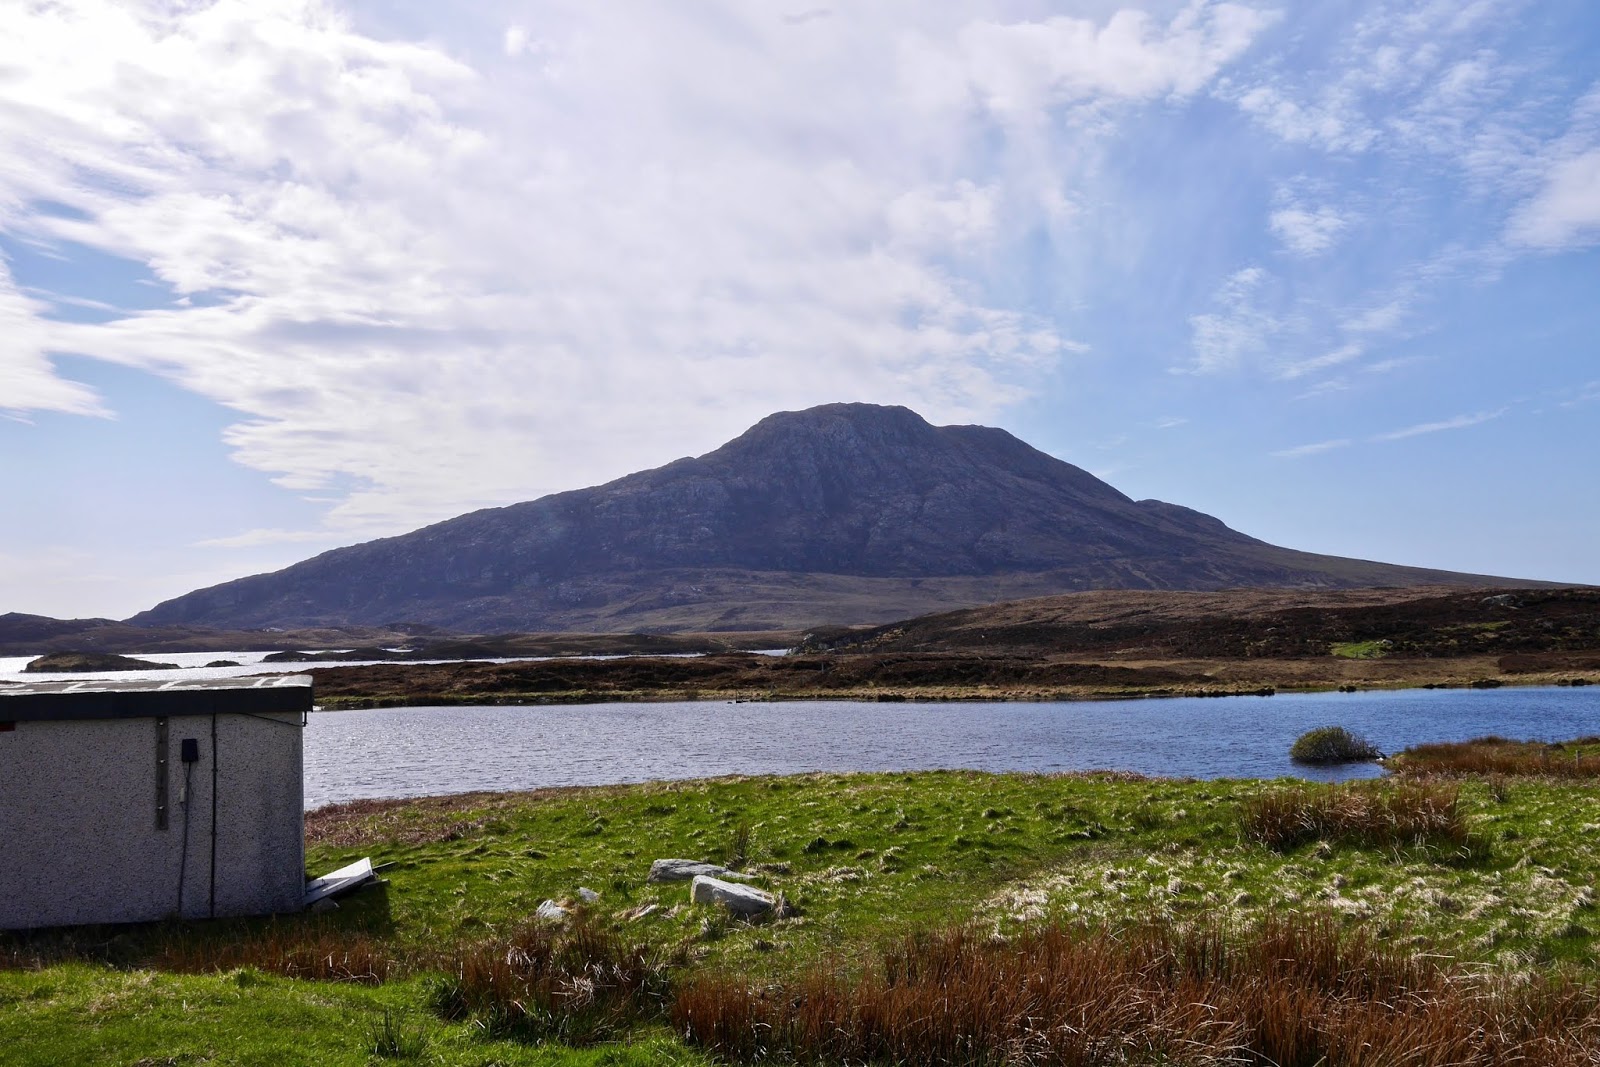 Climbing Eaval, Scotland,, Almost Chic and Cal McTravels during their Scottish Island Hopping in the outer Hebrides 